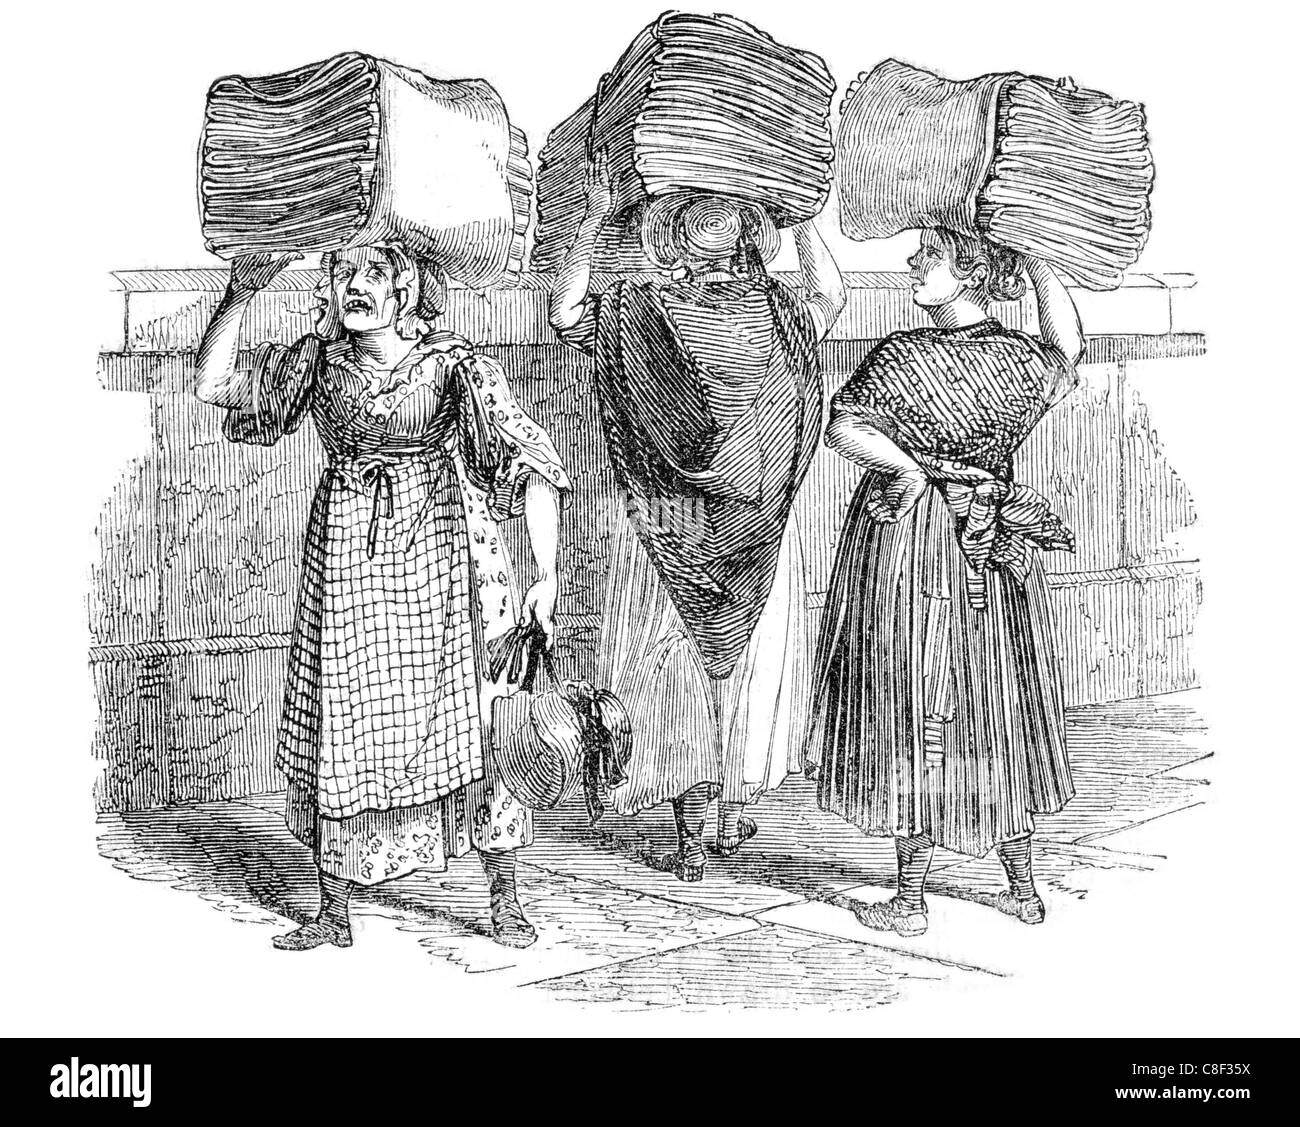 Bermondsey sack bag women hand haulage carry carrying cargo goods trade sales transport logistics product old lady Stock Photo